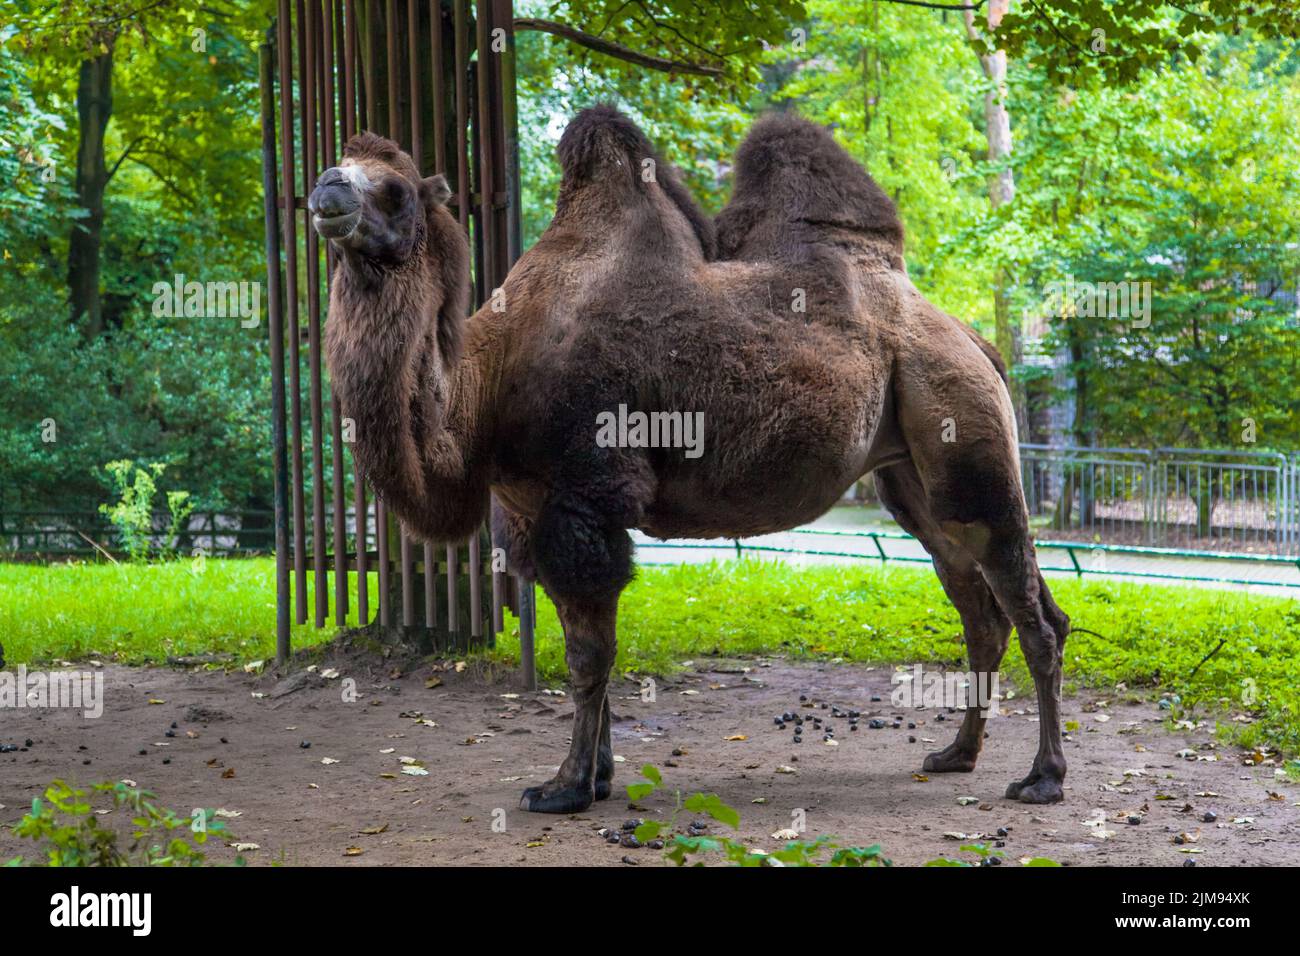 Camel in a Zoo park Stock Photo